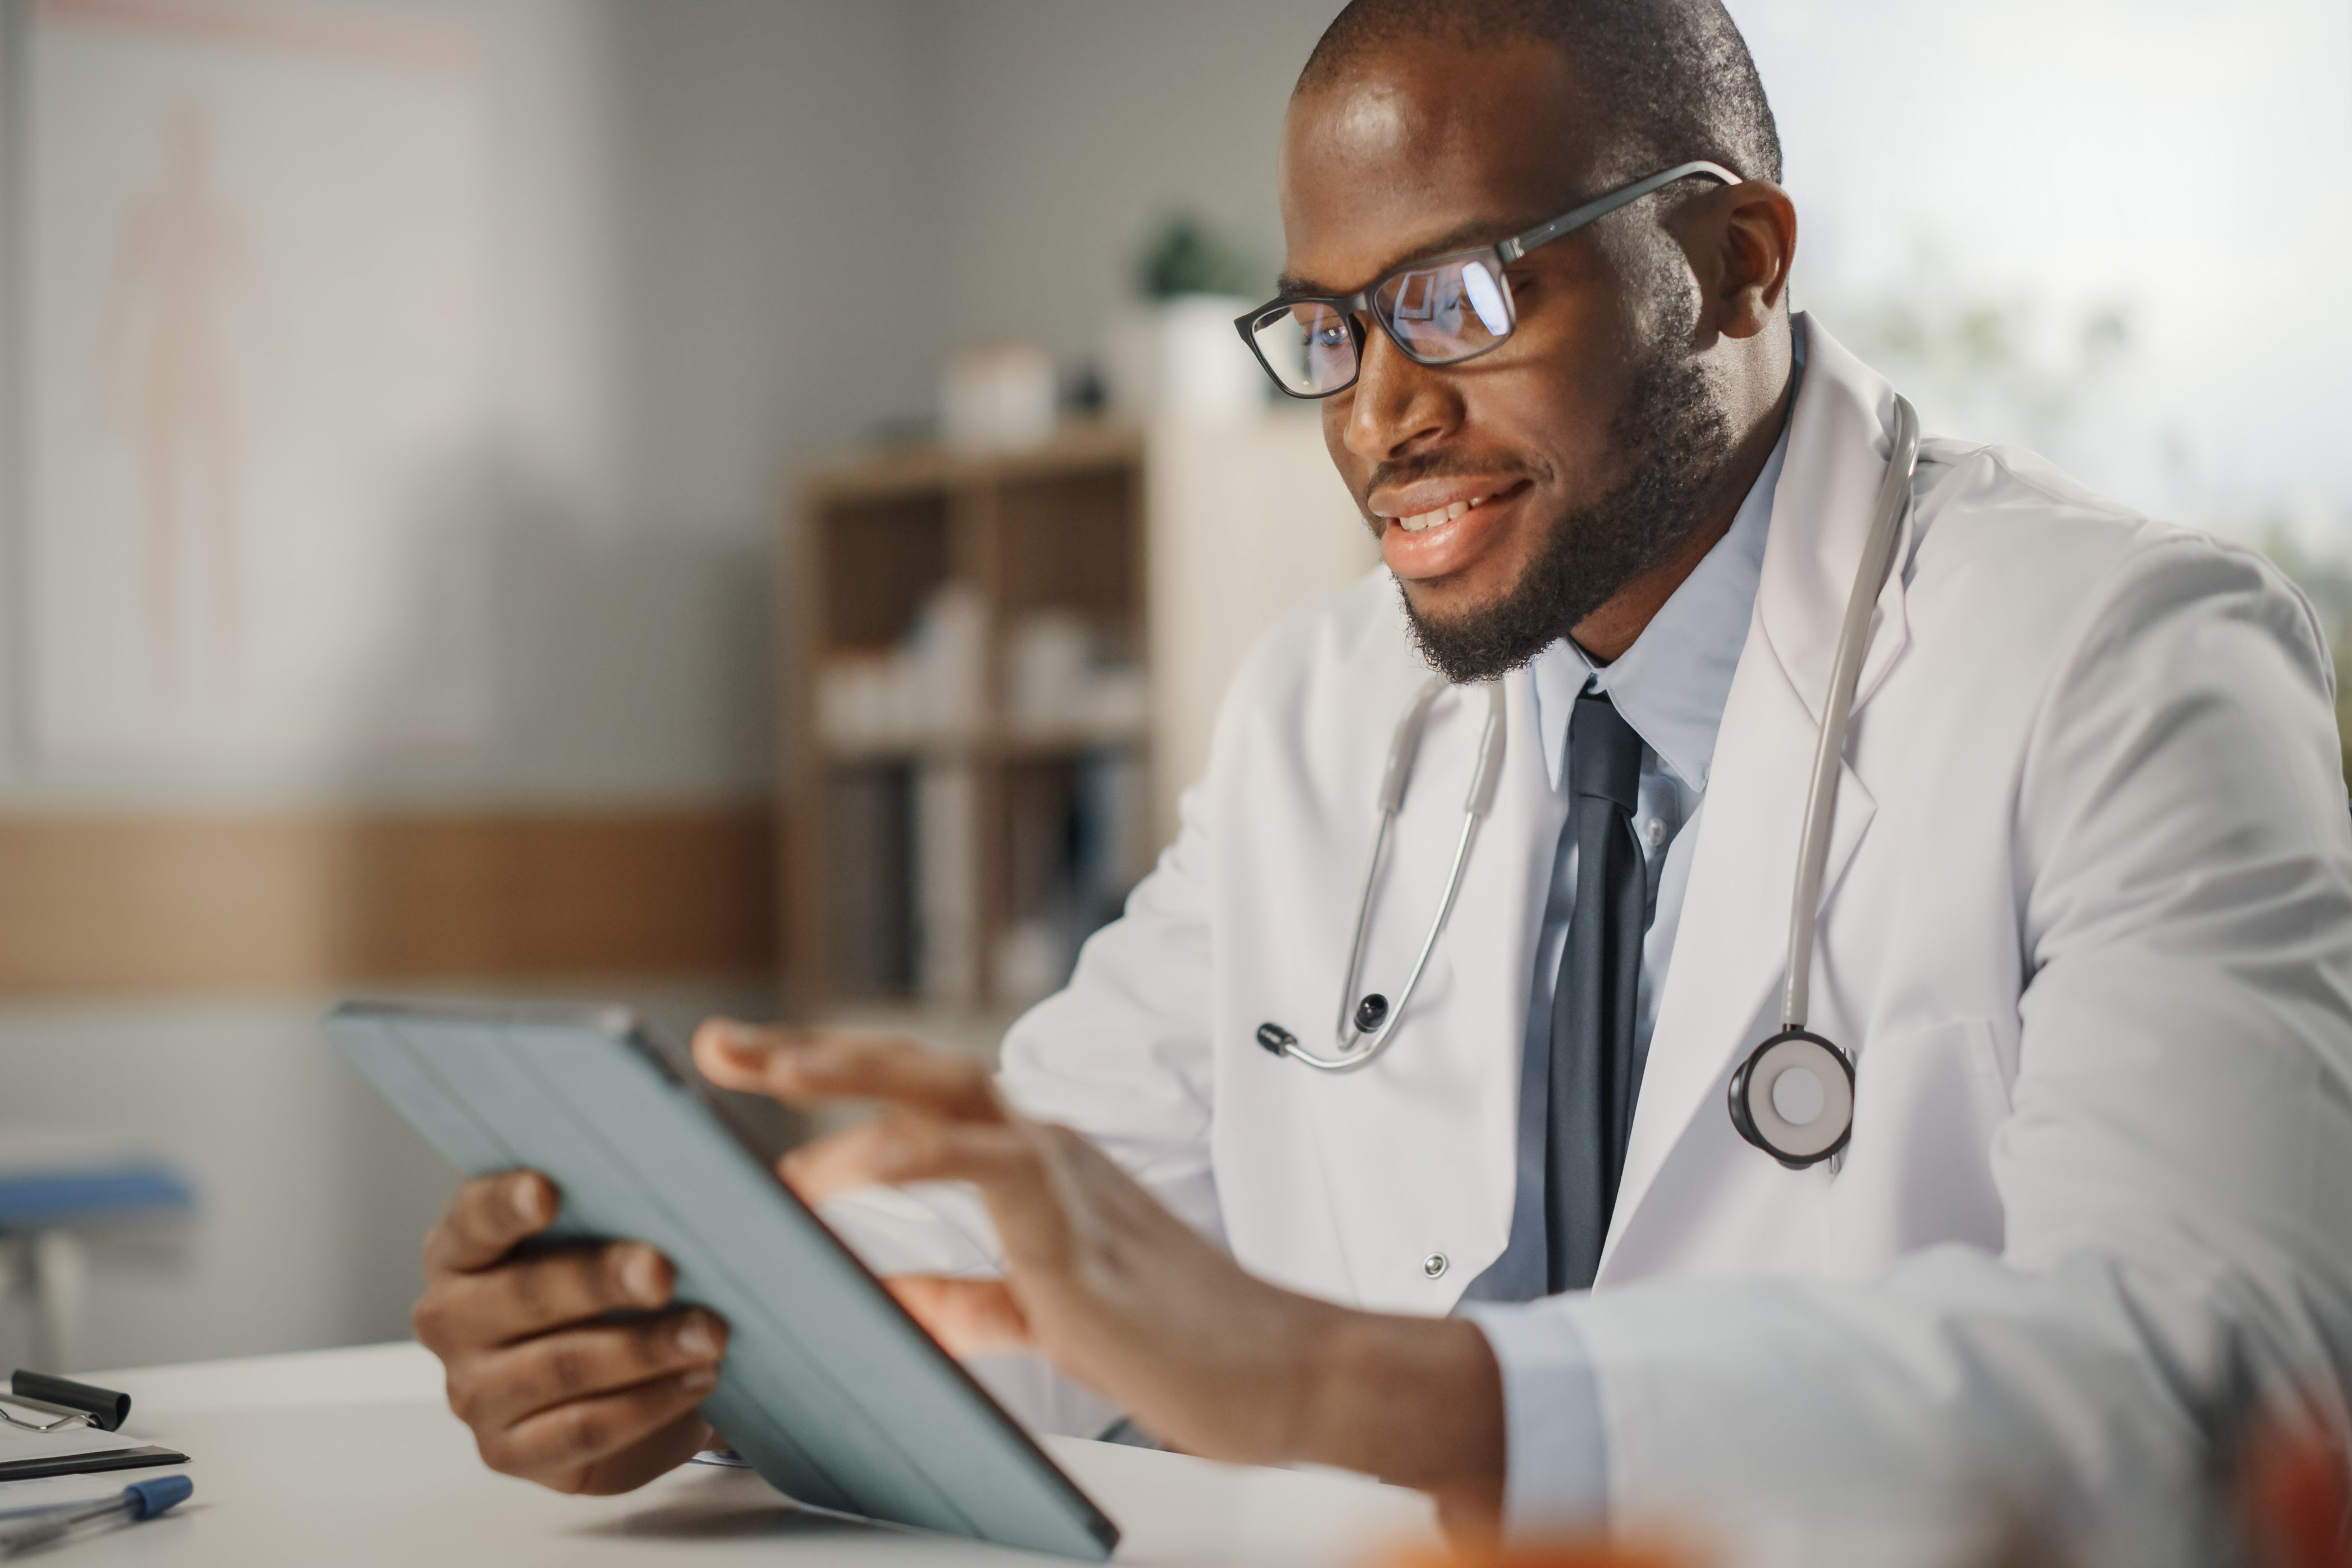 An Oncologist, a Black man, wearing a white coat and stethoscope, smiling as he reviews patient medical records on a tablet.